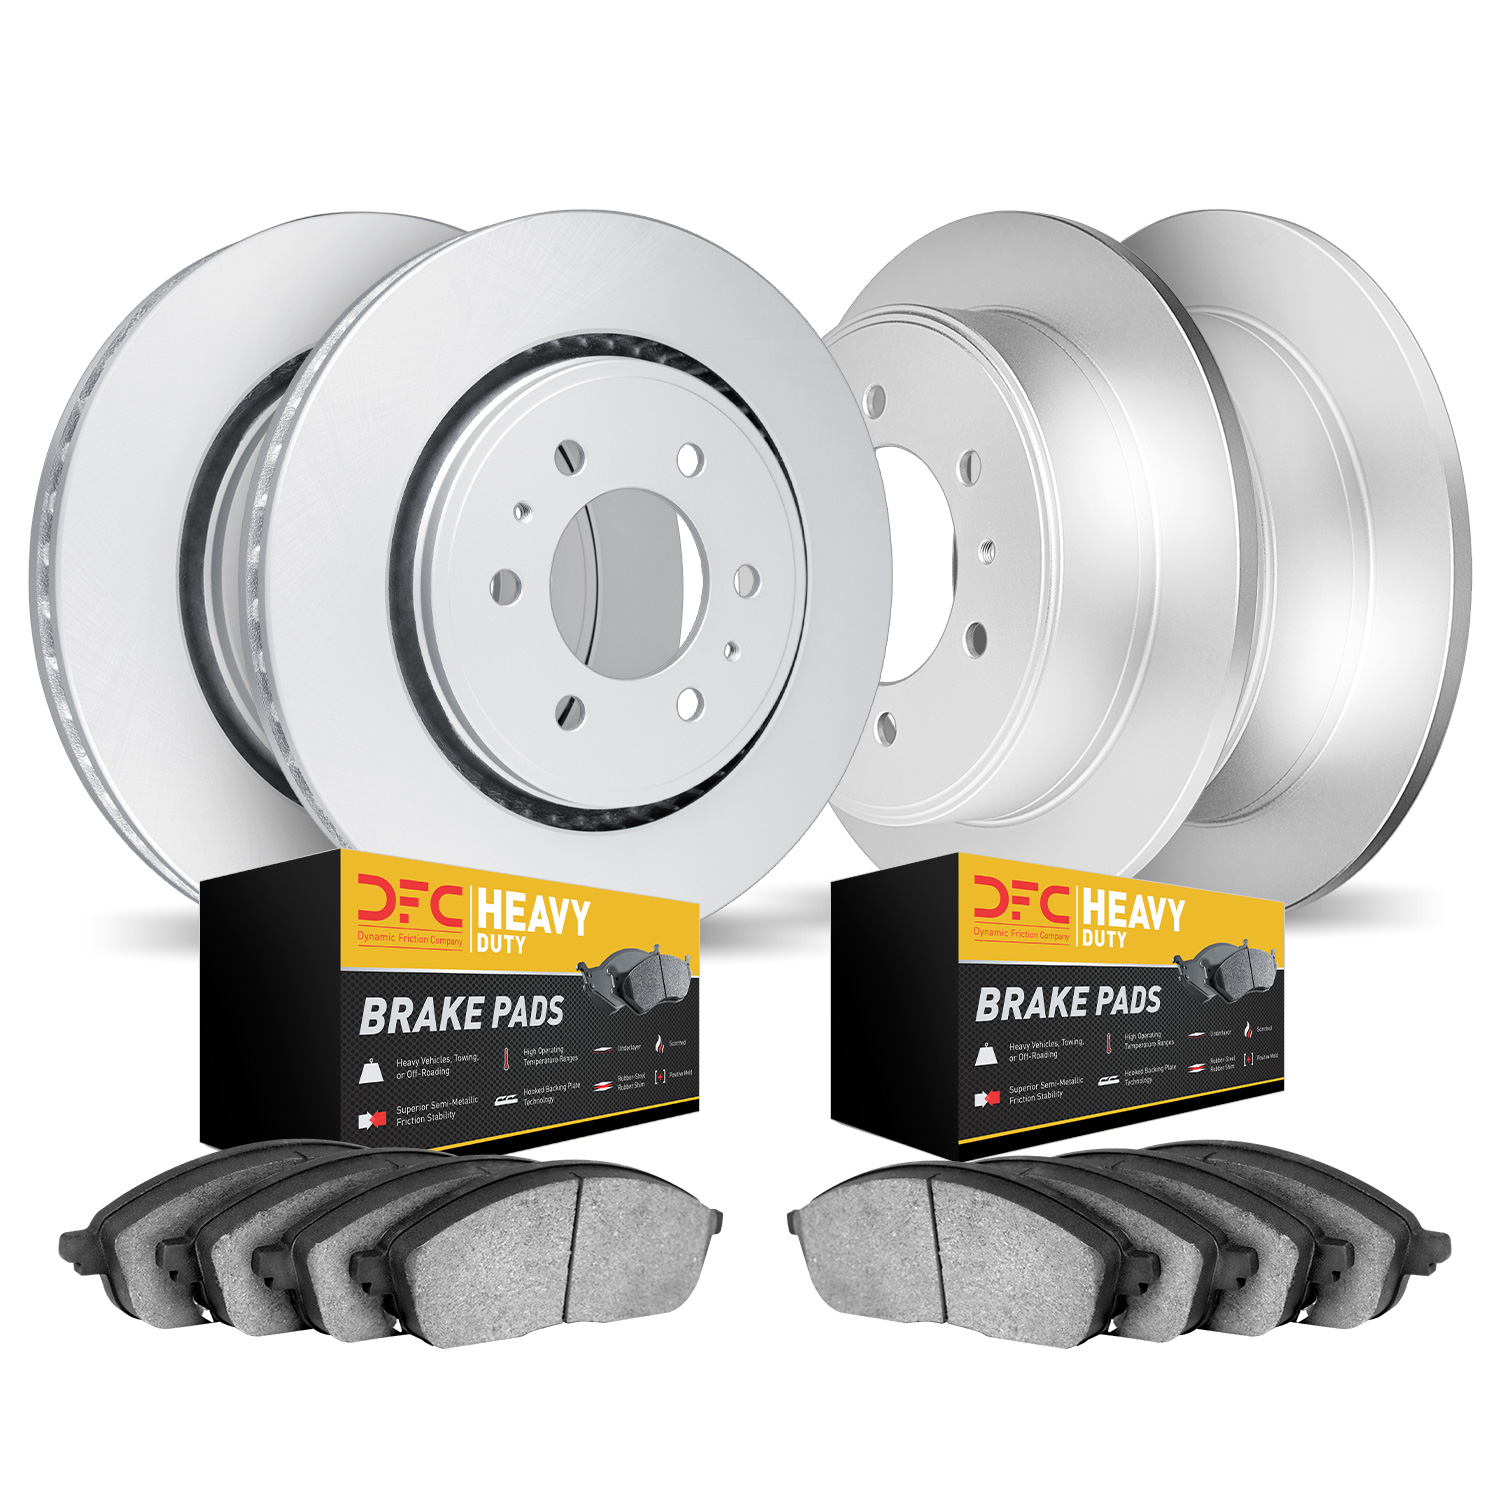 4204-40090 Geospec Brake Rotors w/Heavy-Duty Brake Pads Kit, Fits Select Multiple Makes/Models, Position: Front and Rear